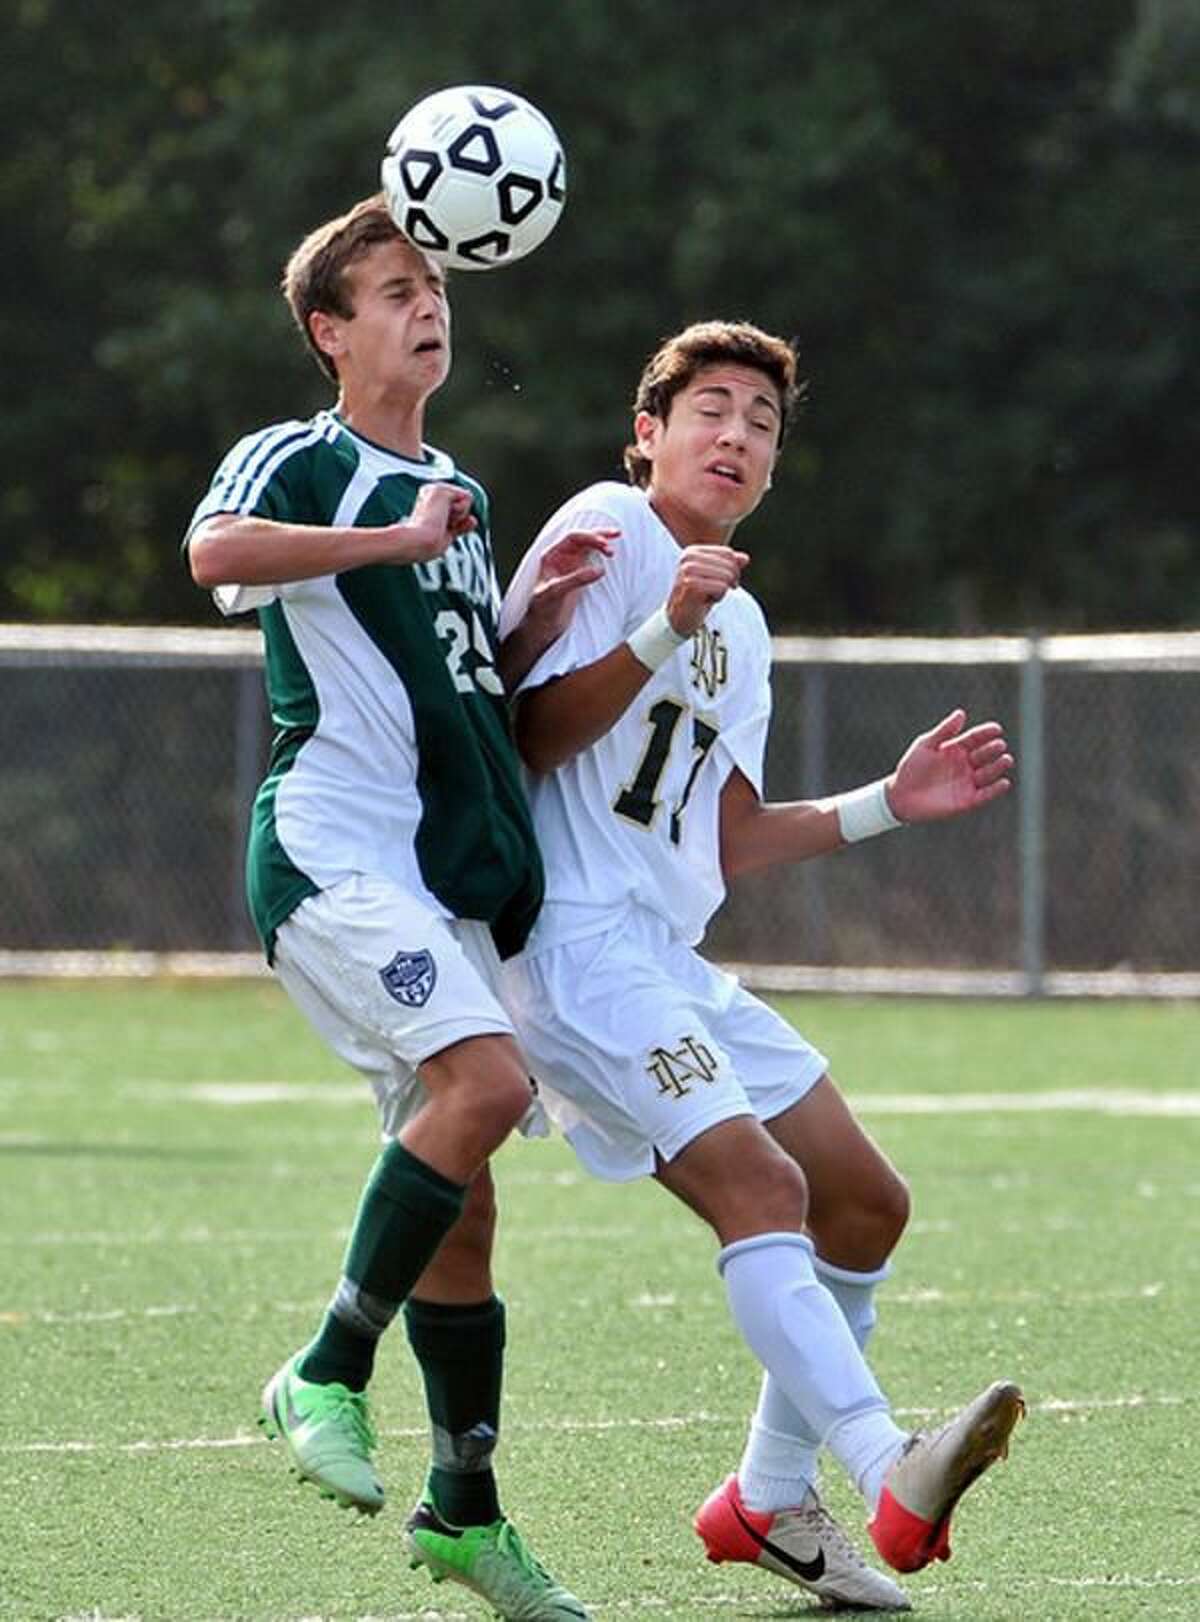 (Peter Casolino — New Haven Register) Guilford's Ben Rattet battles for a midfield header against Notre Dame's Alexander Ossa during the first half.